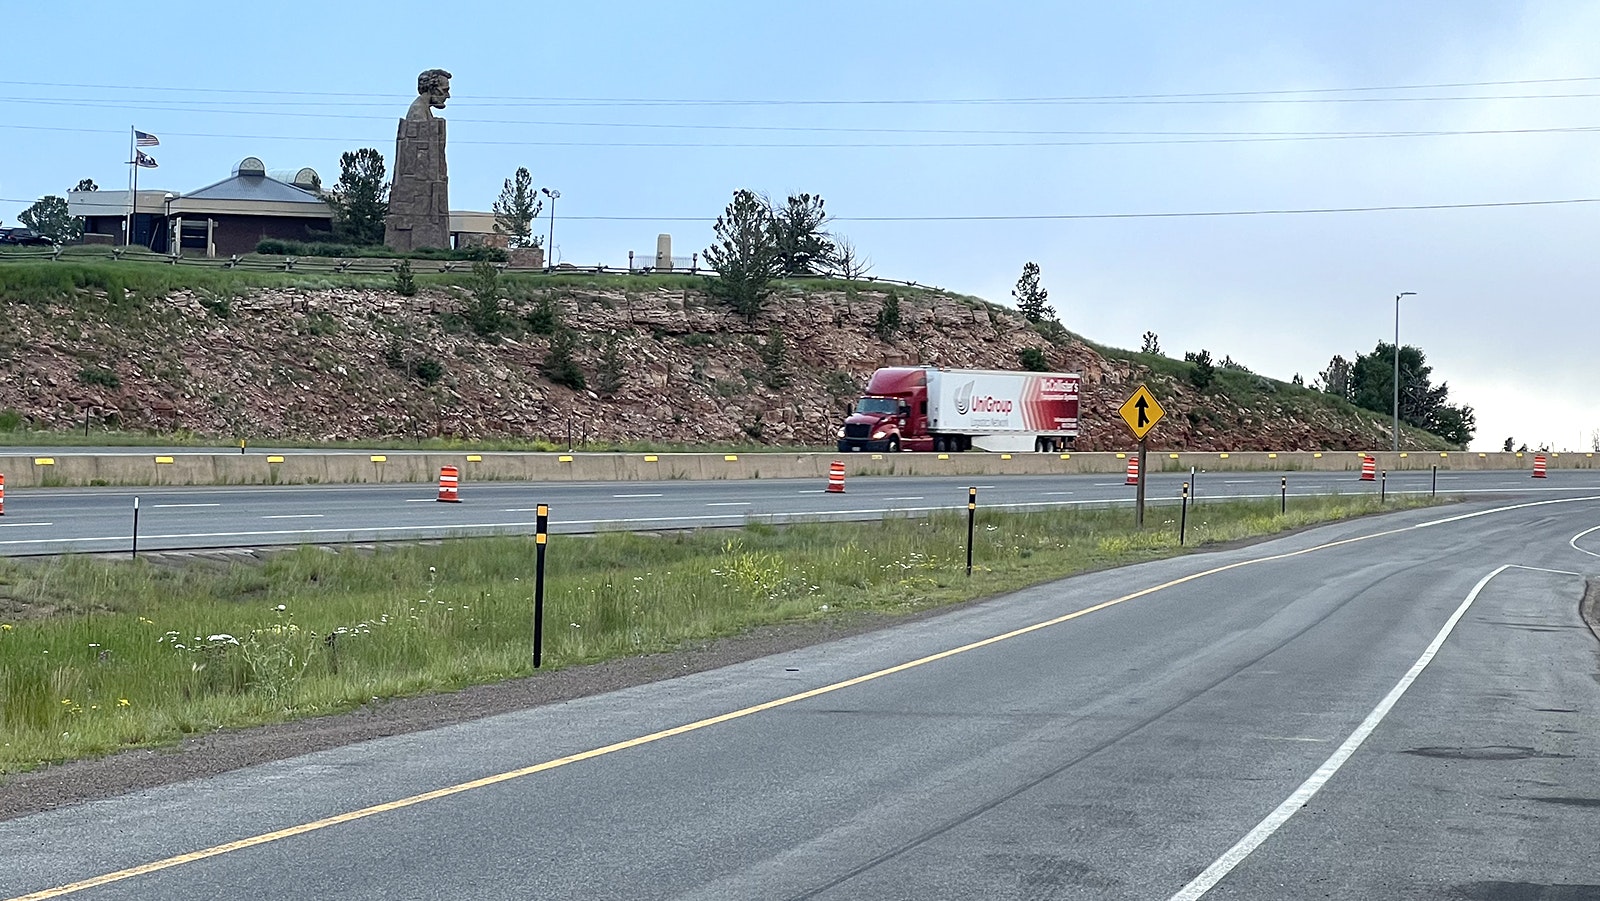 The Abraham Lincoln Memorial Monumentl towers over a rest stop at the top of Sherman Hill along Interstate 80 between Laramie and Cheyenne.